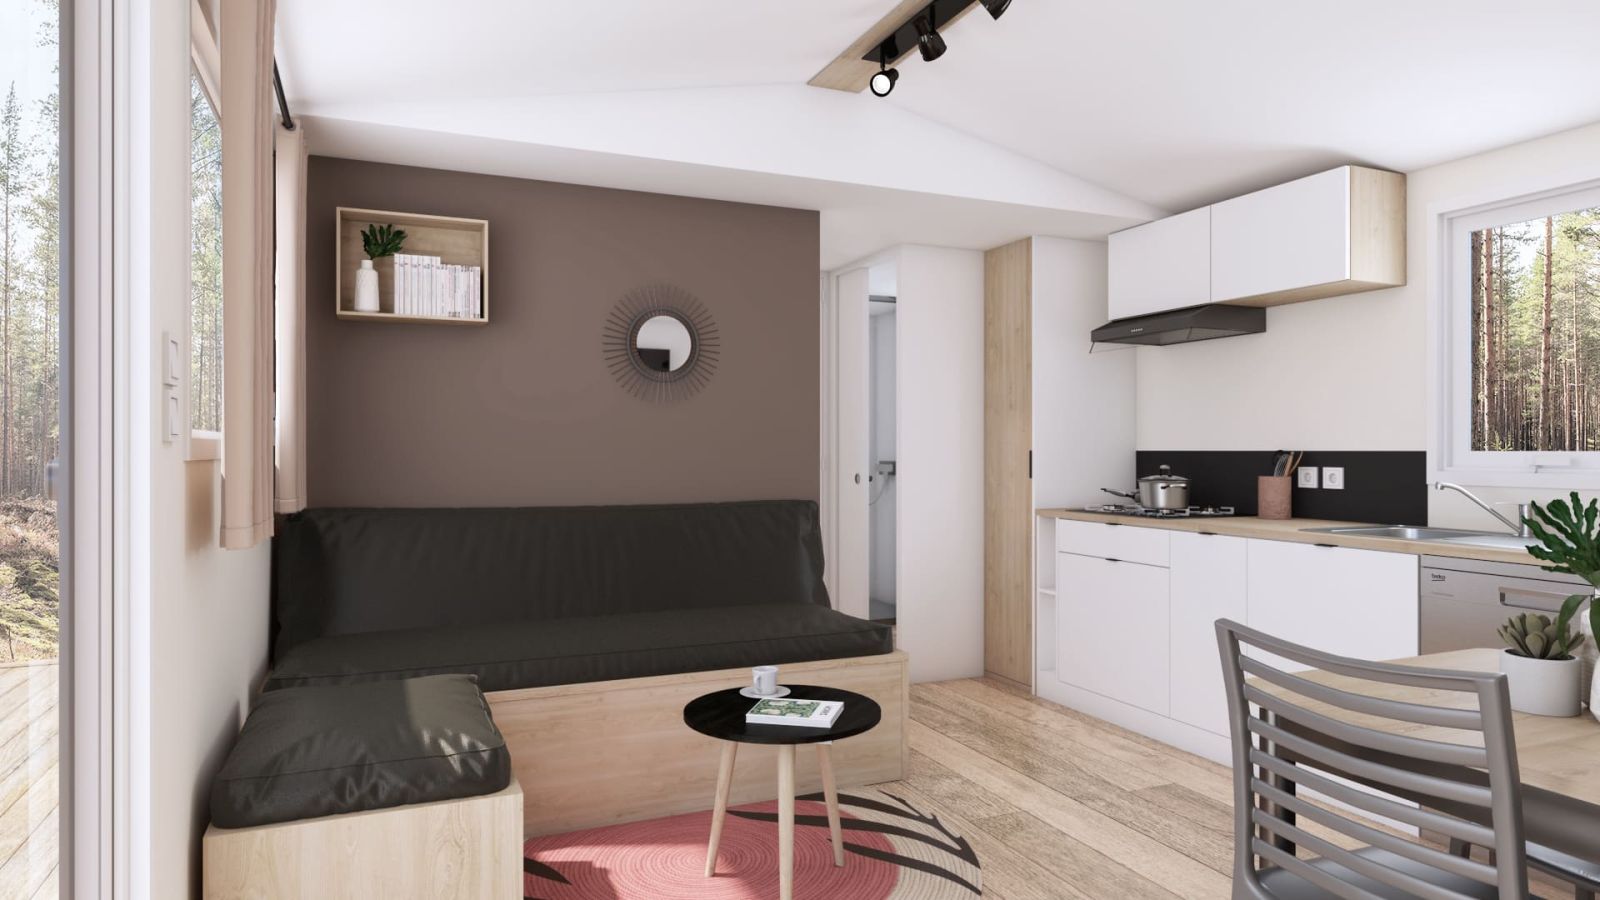  residences-trigano-mobil-home-2chambres-nest35.2